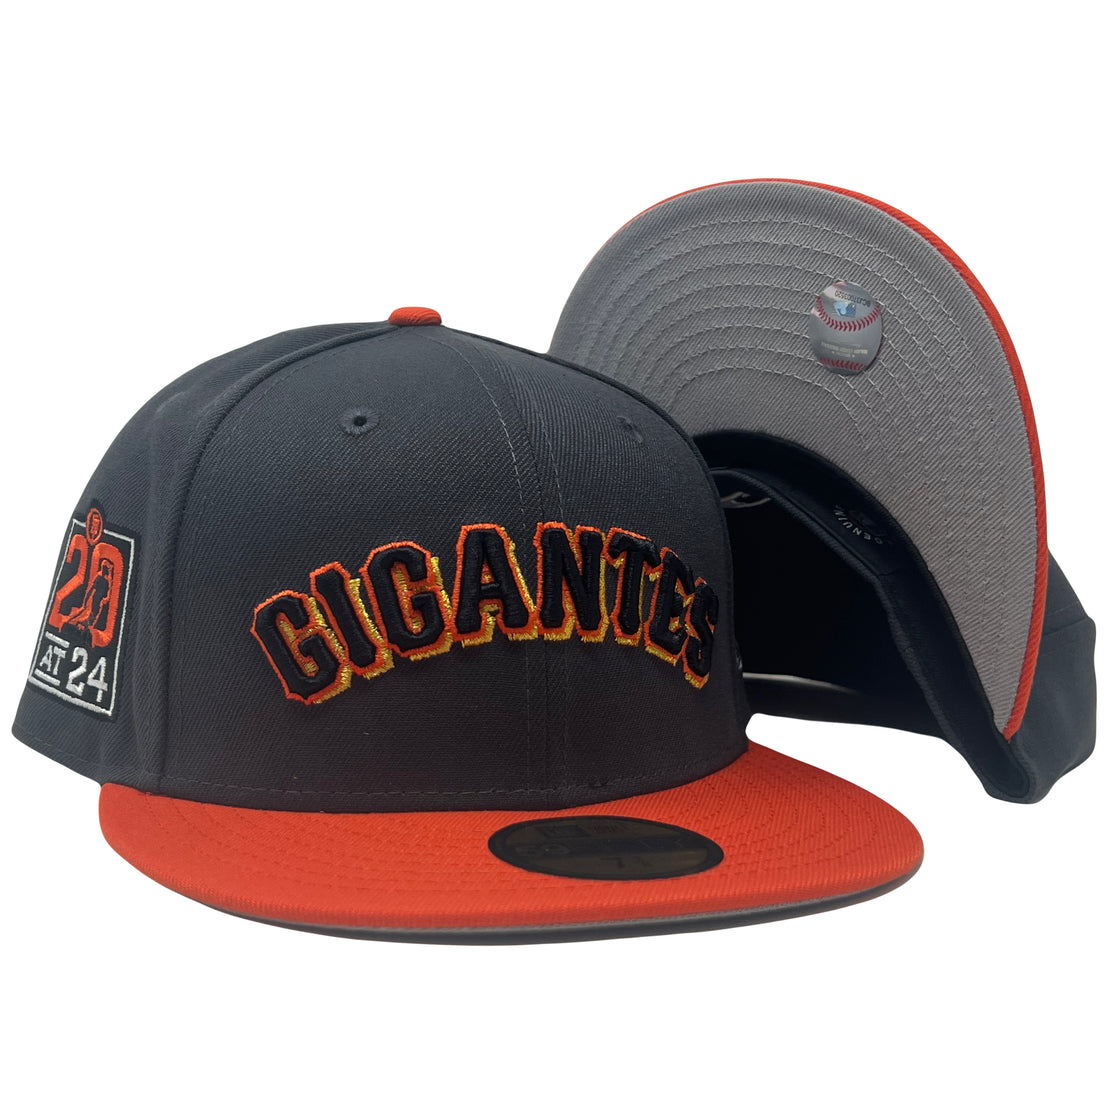 San Francisco Giants Gigantes 20th anniversary Pac Bell AT&T Park New Era Fitted Hat